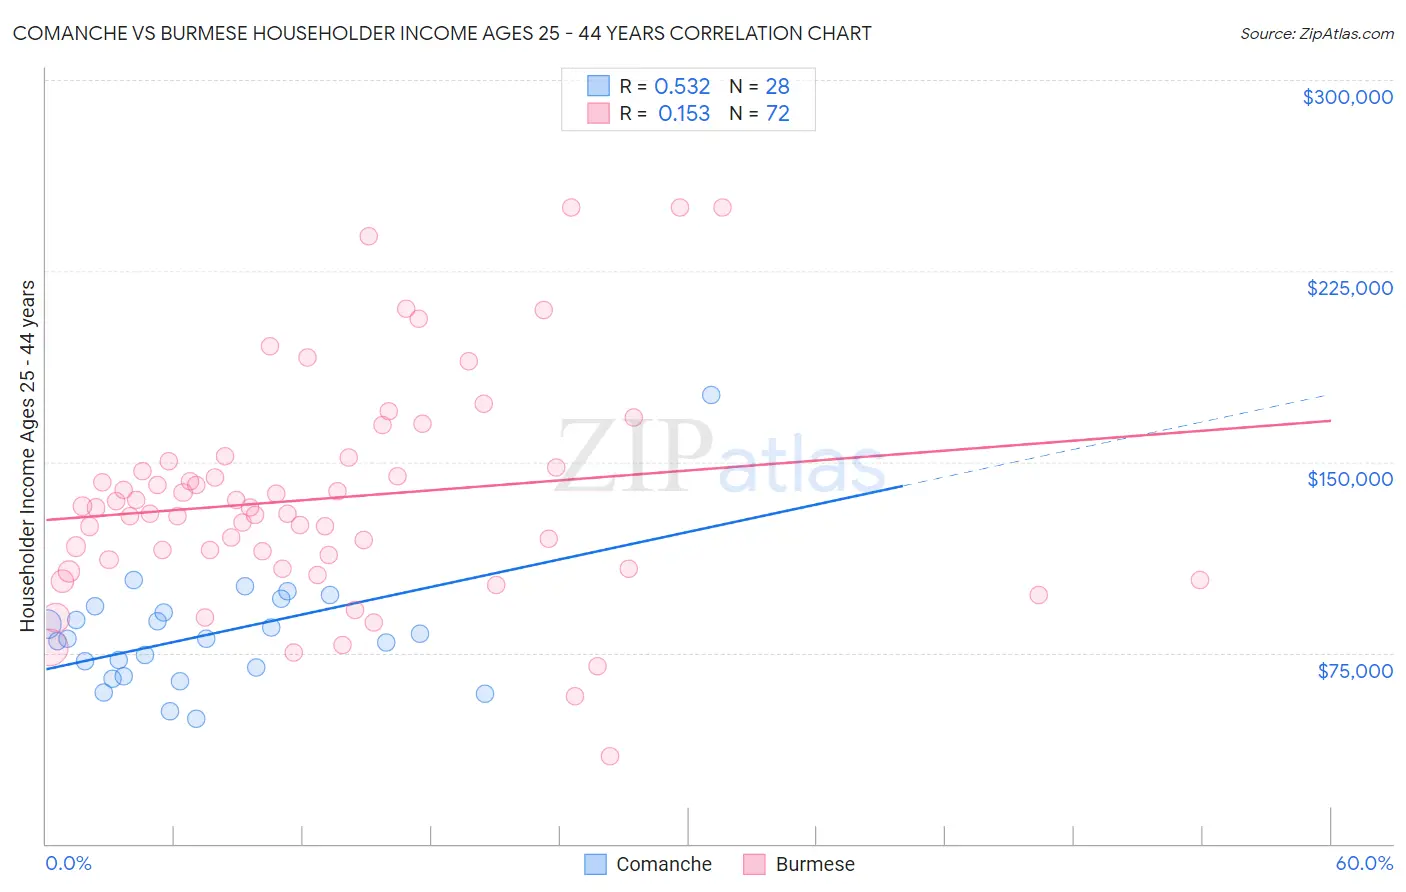 Comanche vs Burmese Householder Income Ages 25 - 44 years